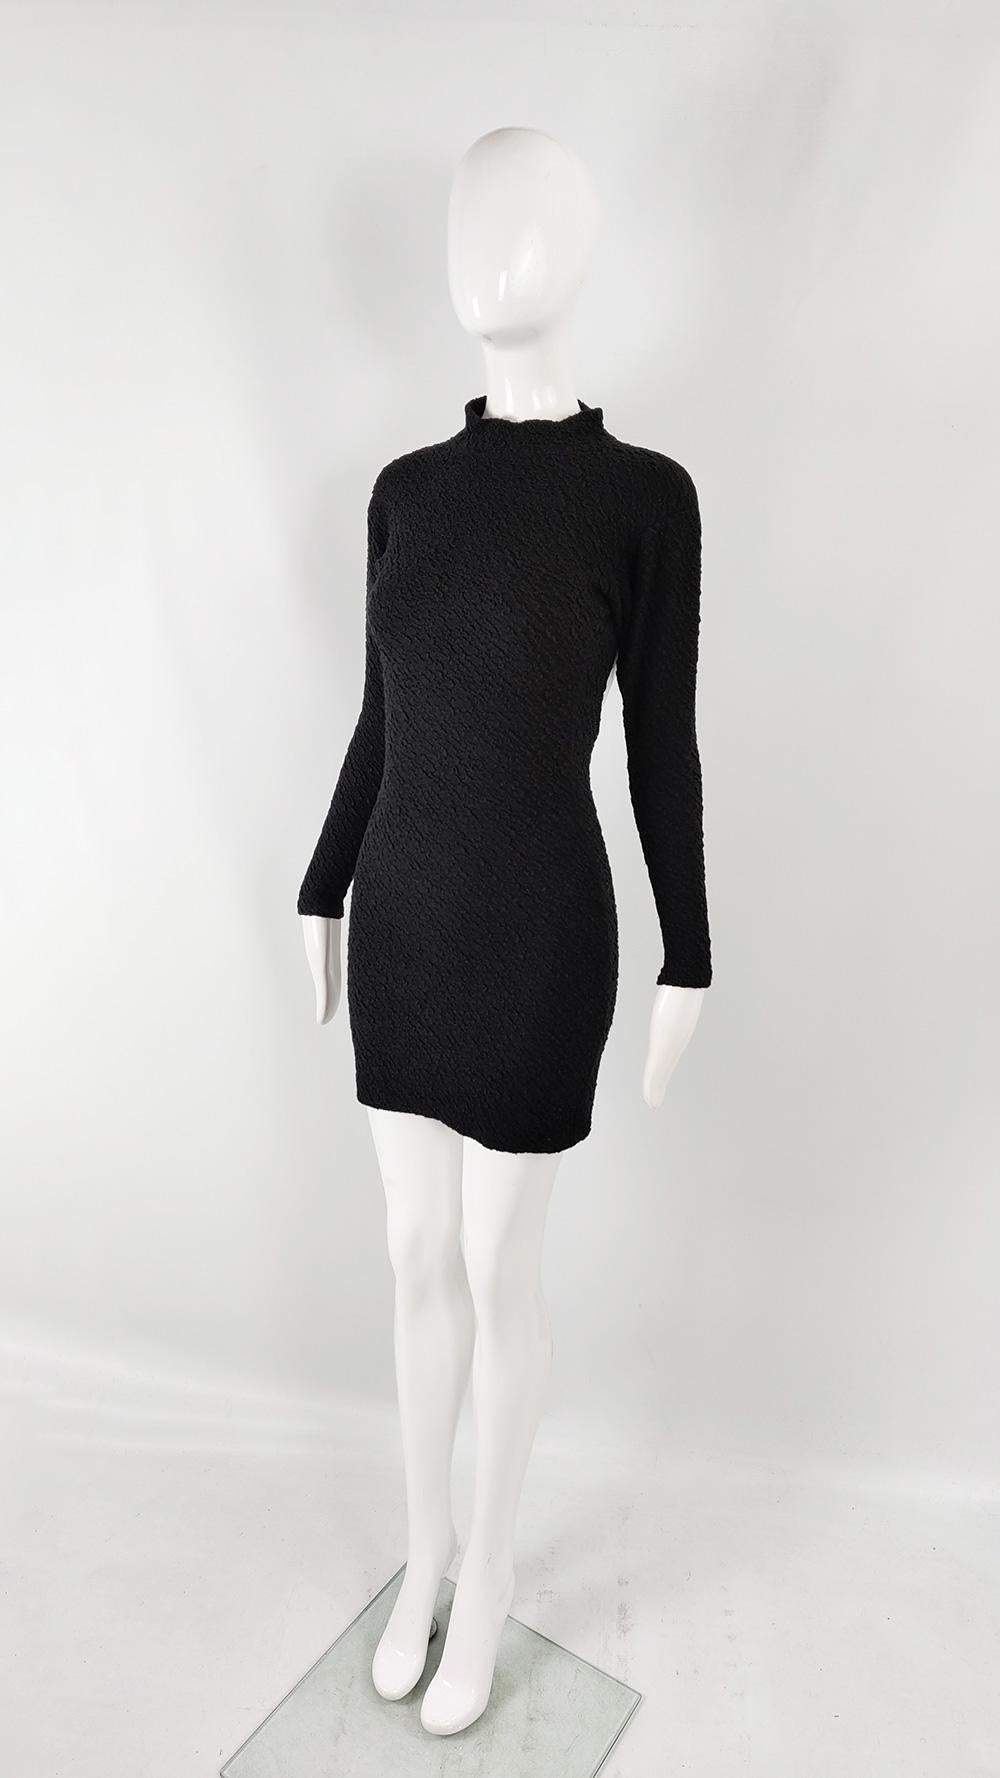 Fiorucci Vintage 80s Textured Black Cloqué Cut Out Backless Party Dress, 1980s In Good Condition For Sale In Doncaster, South Yorkshire